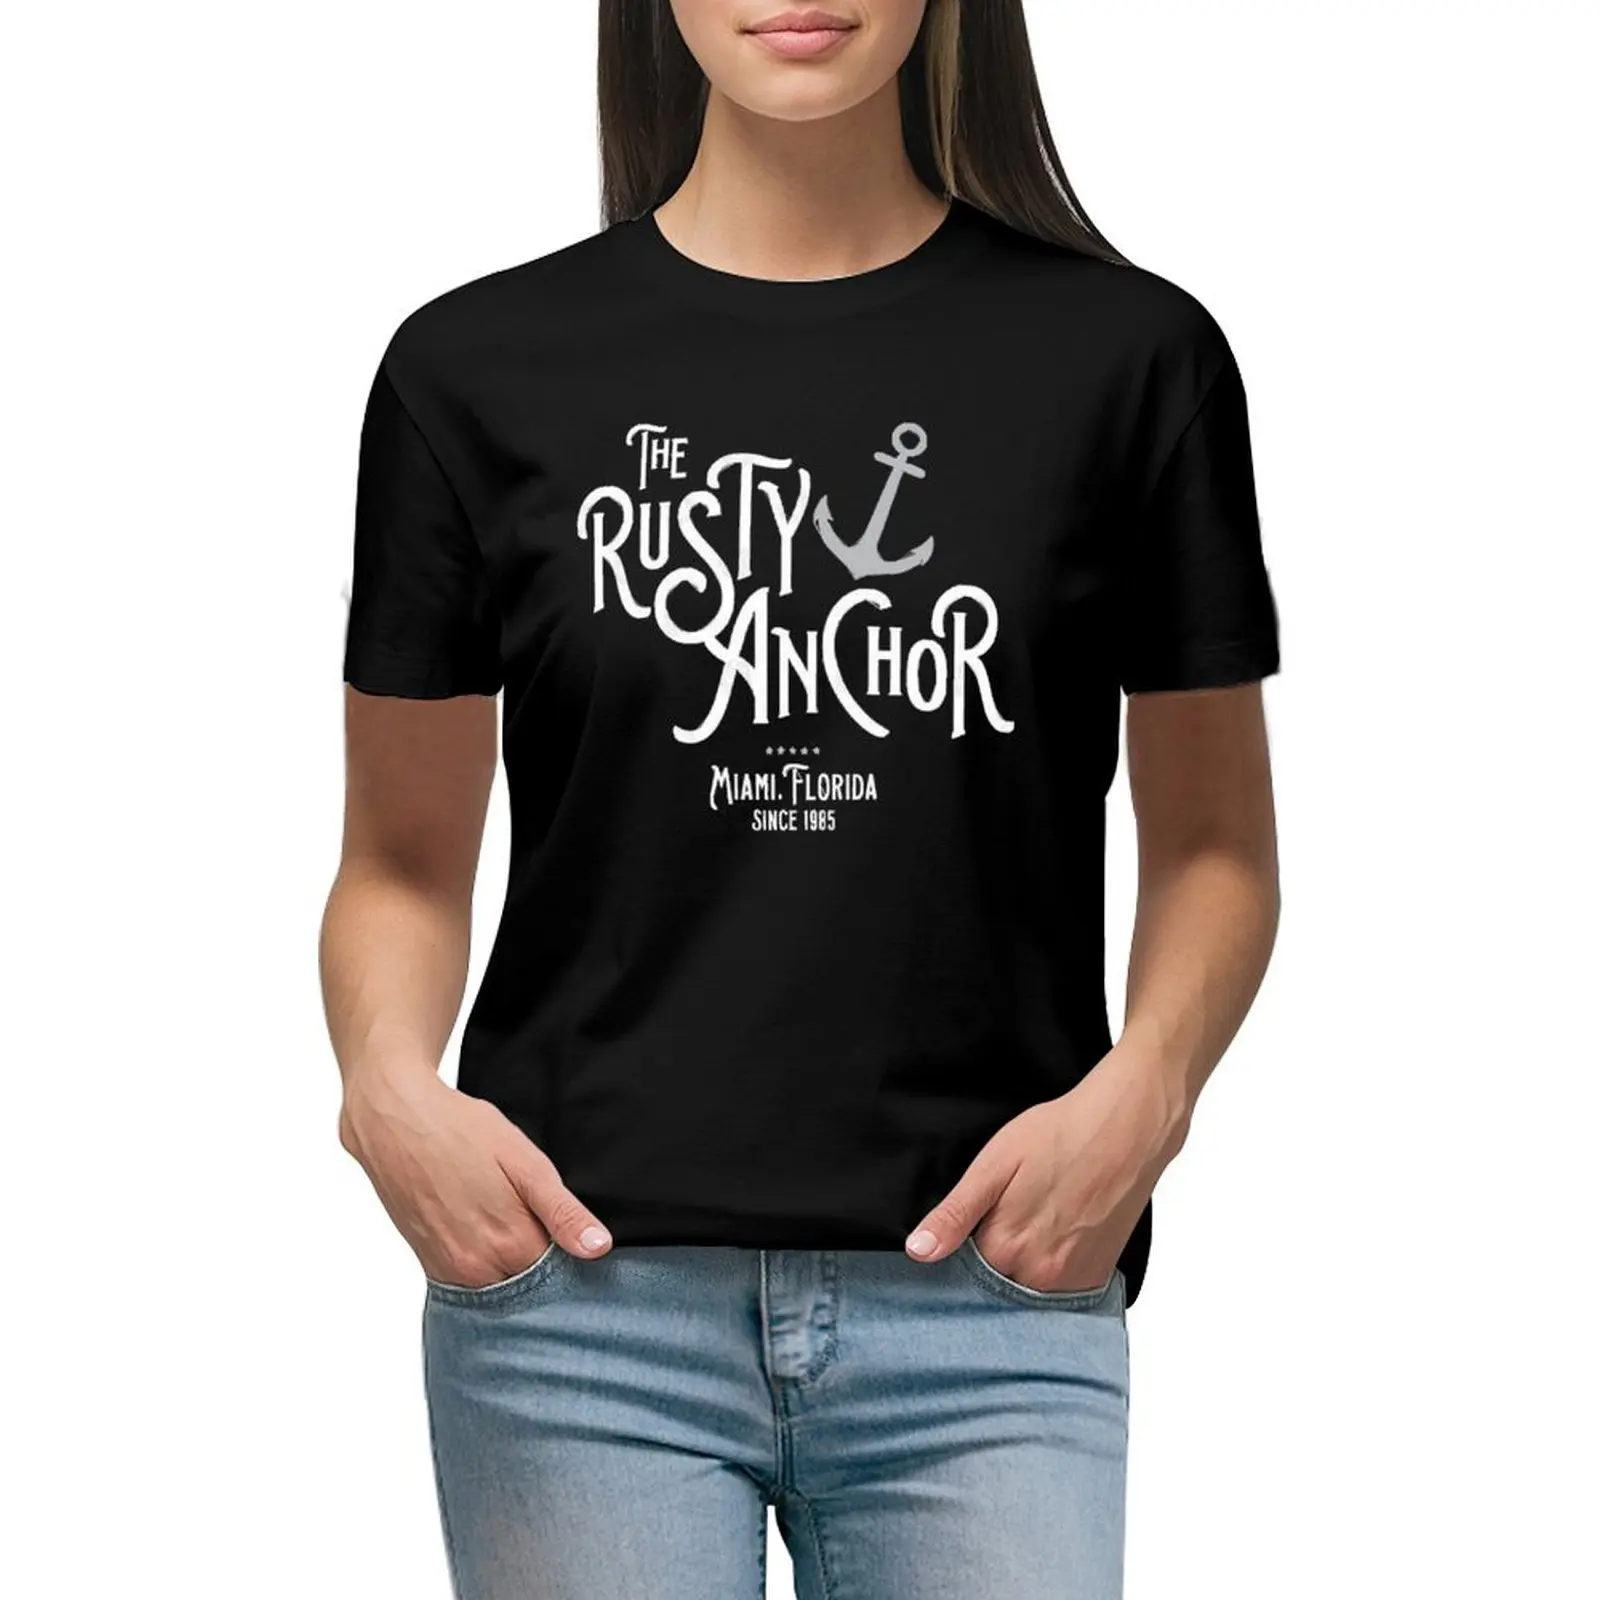 

The Rusty Anchor T-shirt Short sleeve tee summer tops Aesthetic clothing t-shirt dress for Women plus size sexy